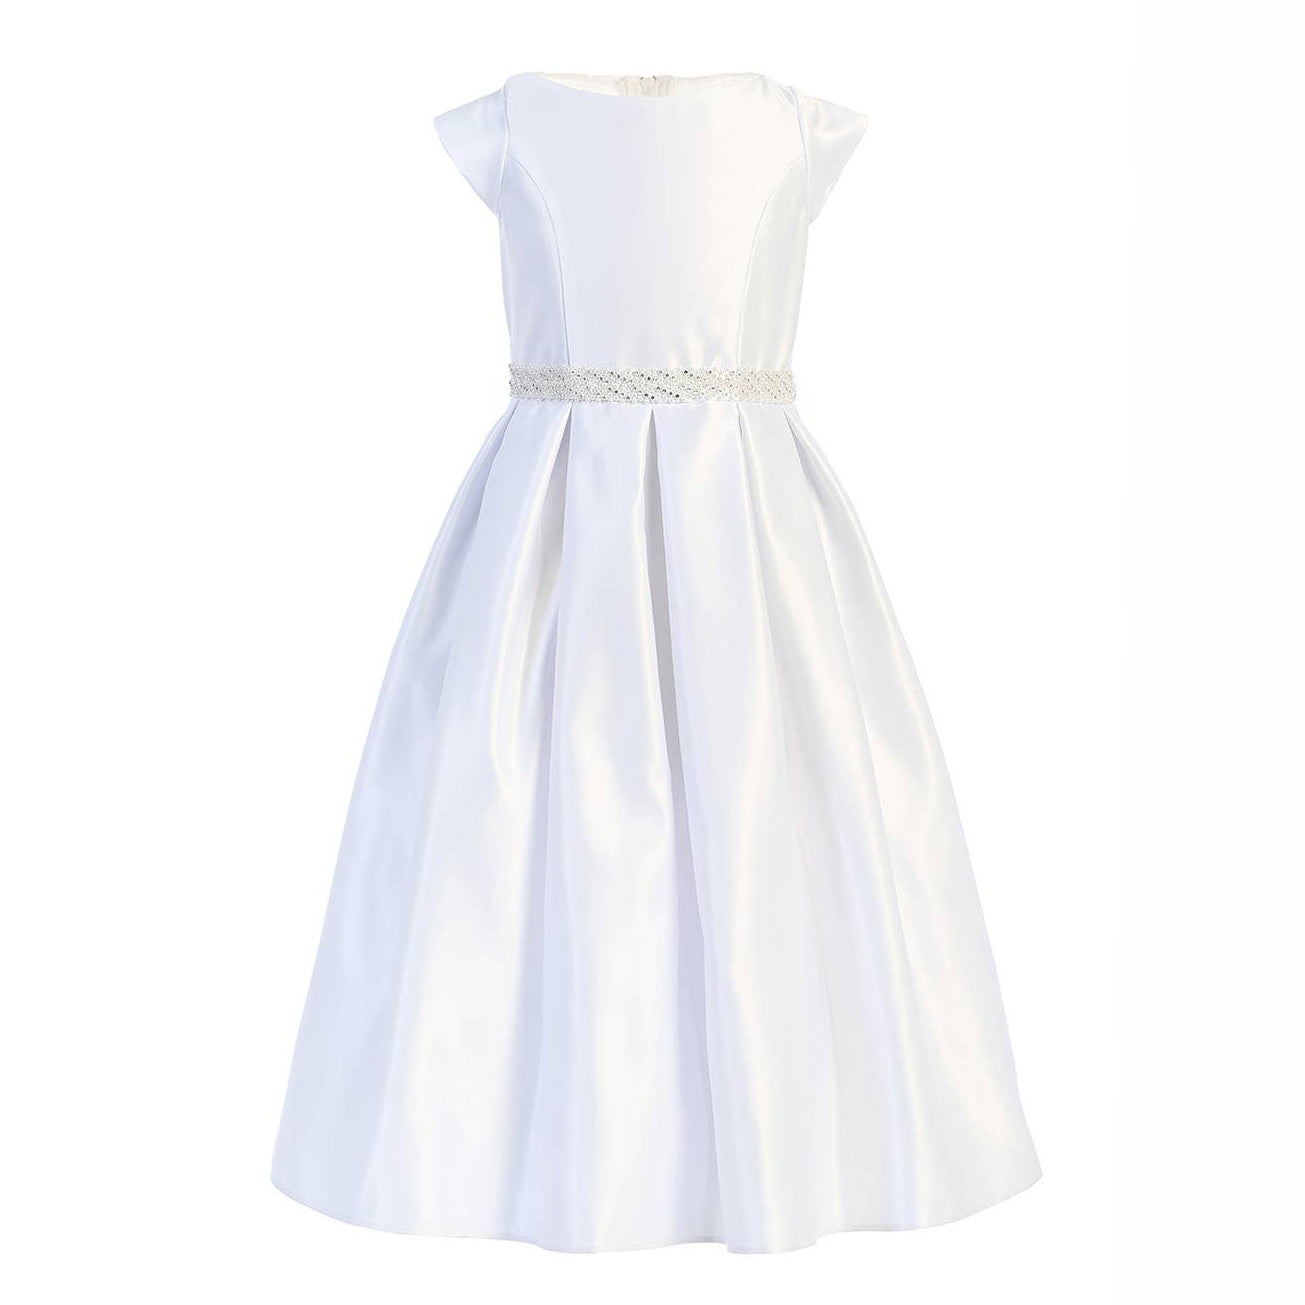 Lily May communion dress from UK Flower Girl Boutique